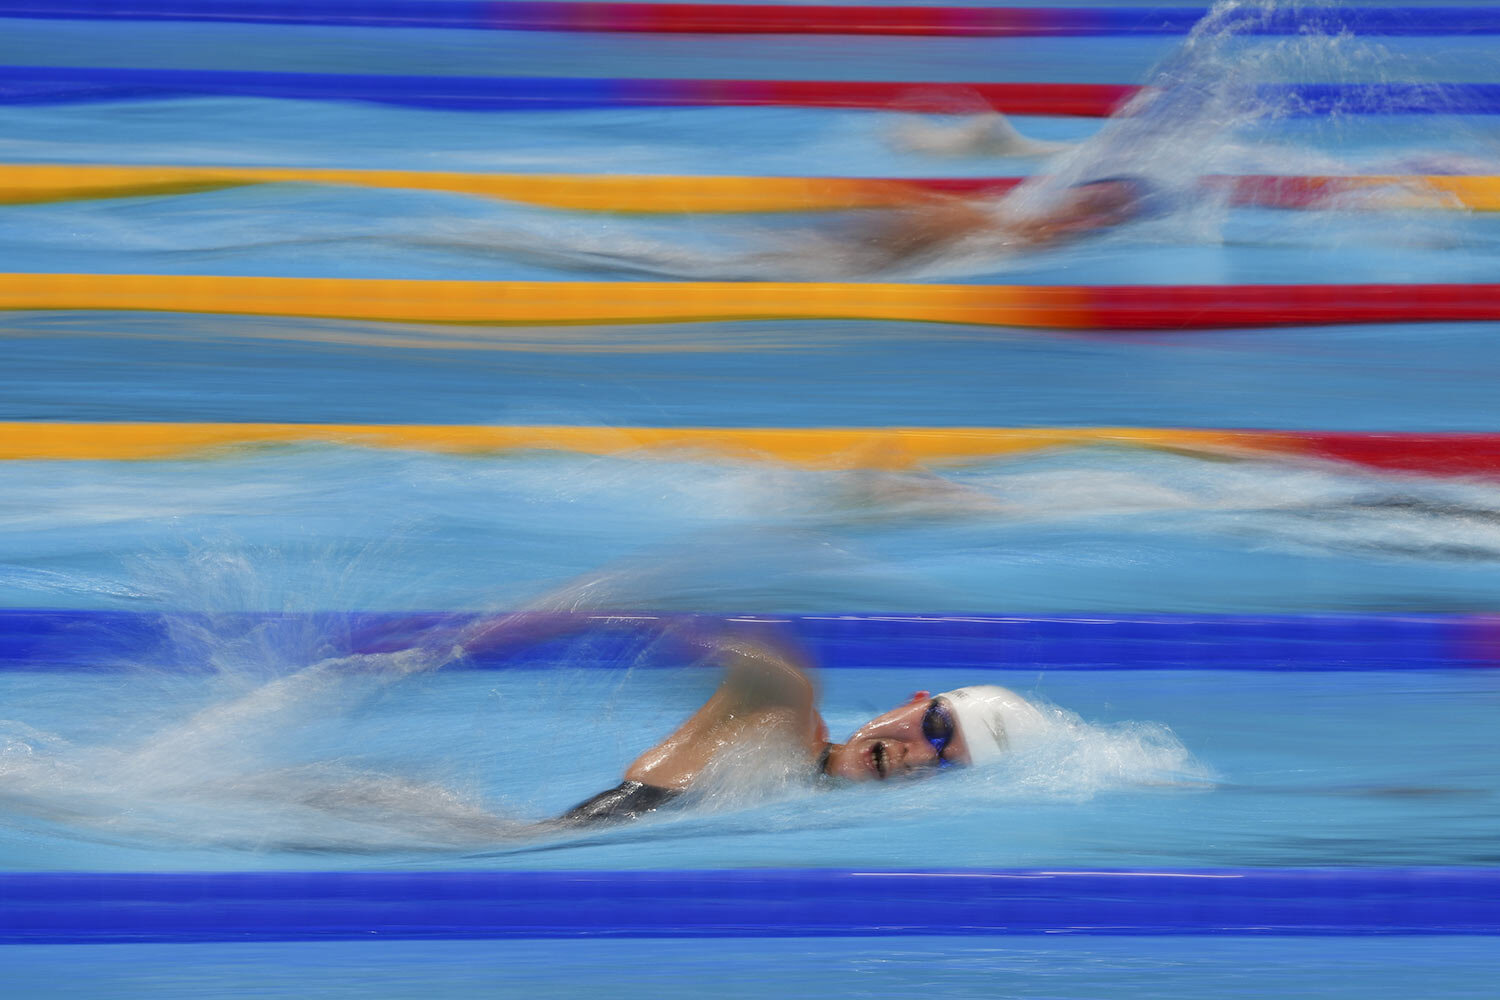  Dakyung Han, of South Korea, swims in a heat during the women's 1500-meter freestyle at the 2020 Summer Olympics, Monday, July 26, 2021, in Tokyo, Japan. (AP Photo/Matthias Schrader) 